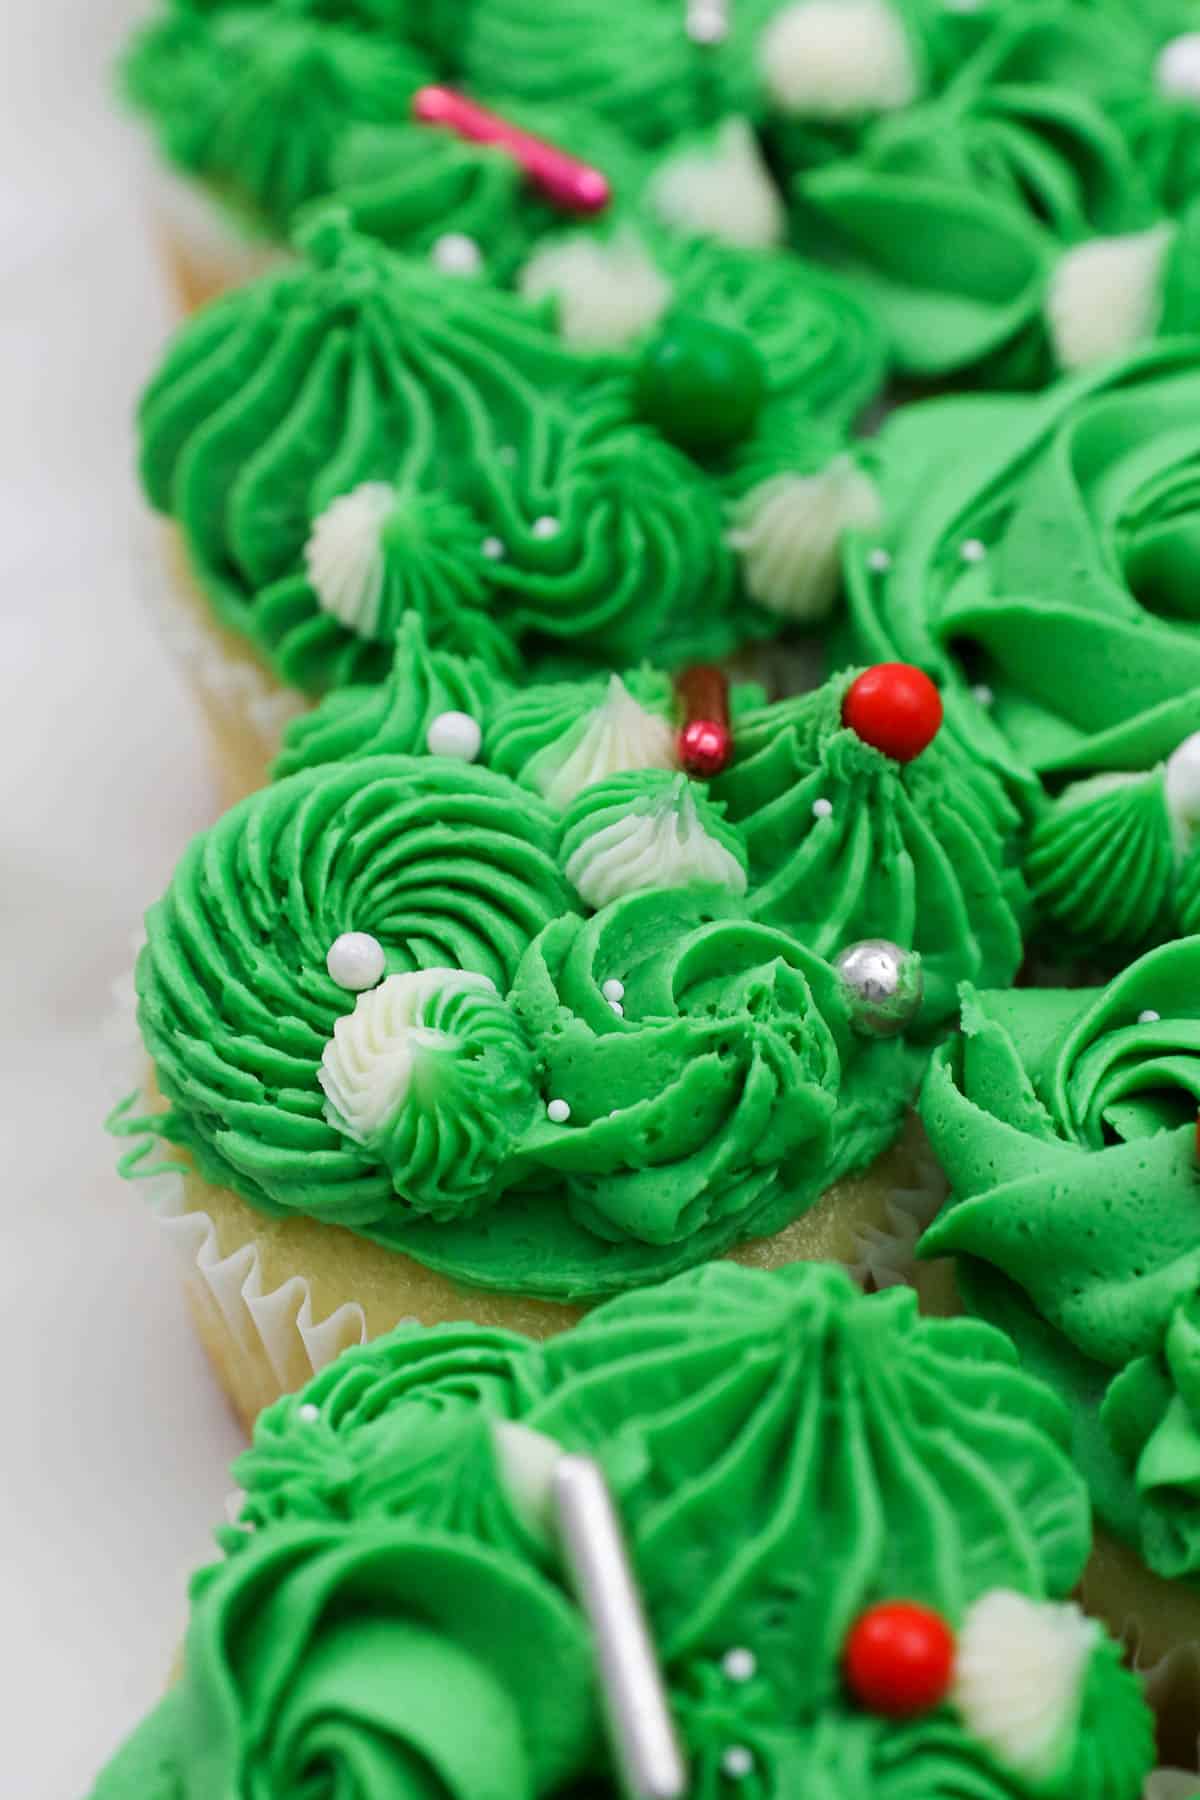 A close-up shot of cupcakes decorated to look like portions of a Christmas tree